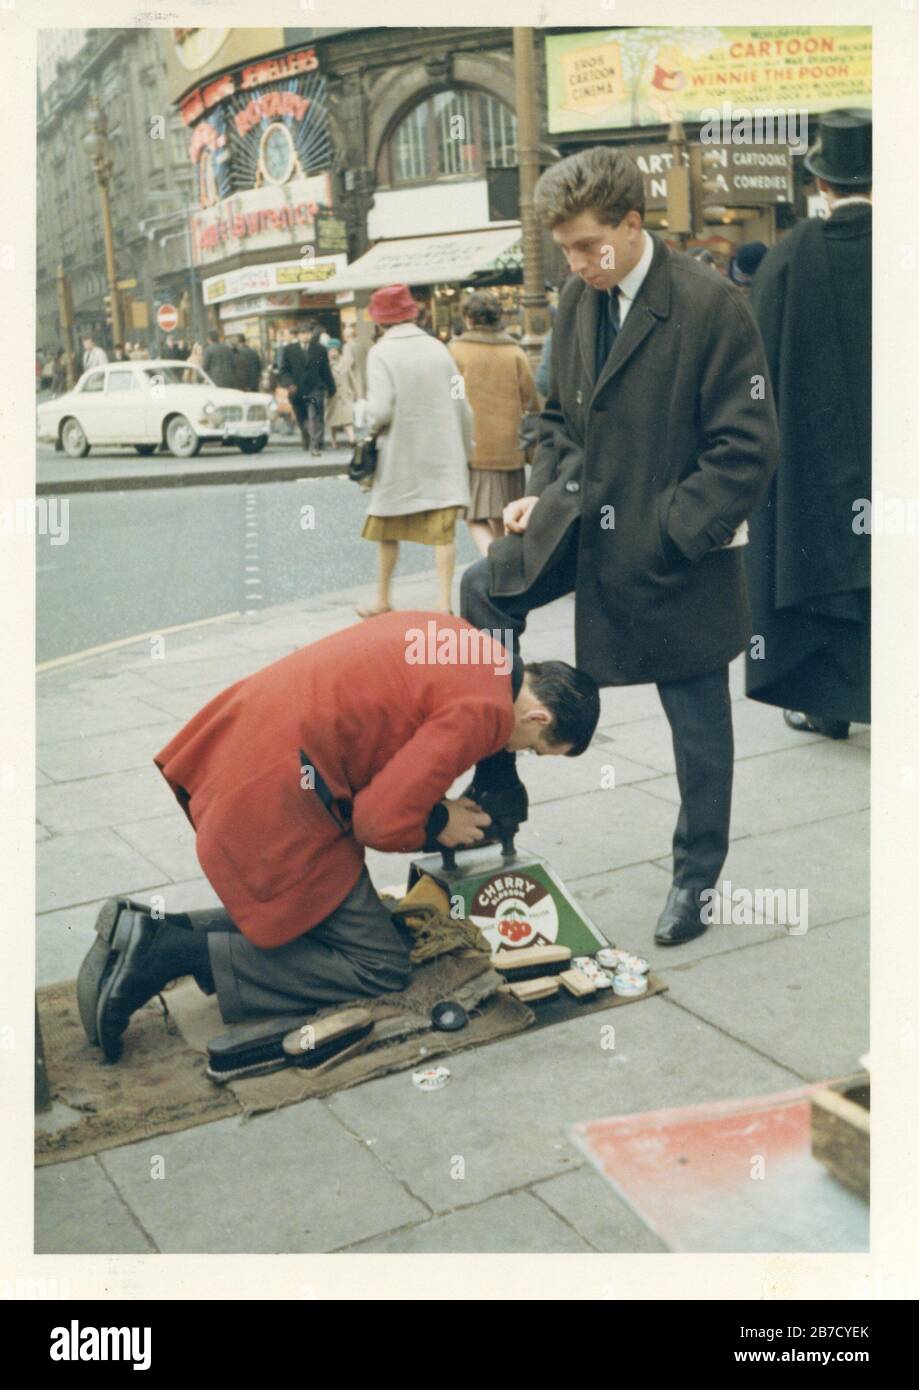 Vintage snapshot image of a young smartly dressed man in a suit having his shoes shined and buffed on the streets of London in the 1960s. Found photo social history vernacular photography UK. Photographer unknown (Richard Bradley collection) Stock Photo